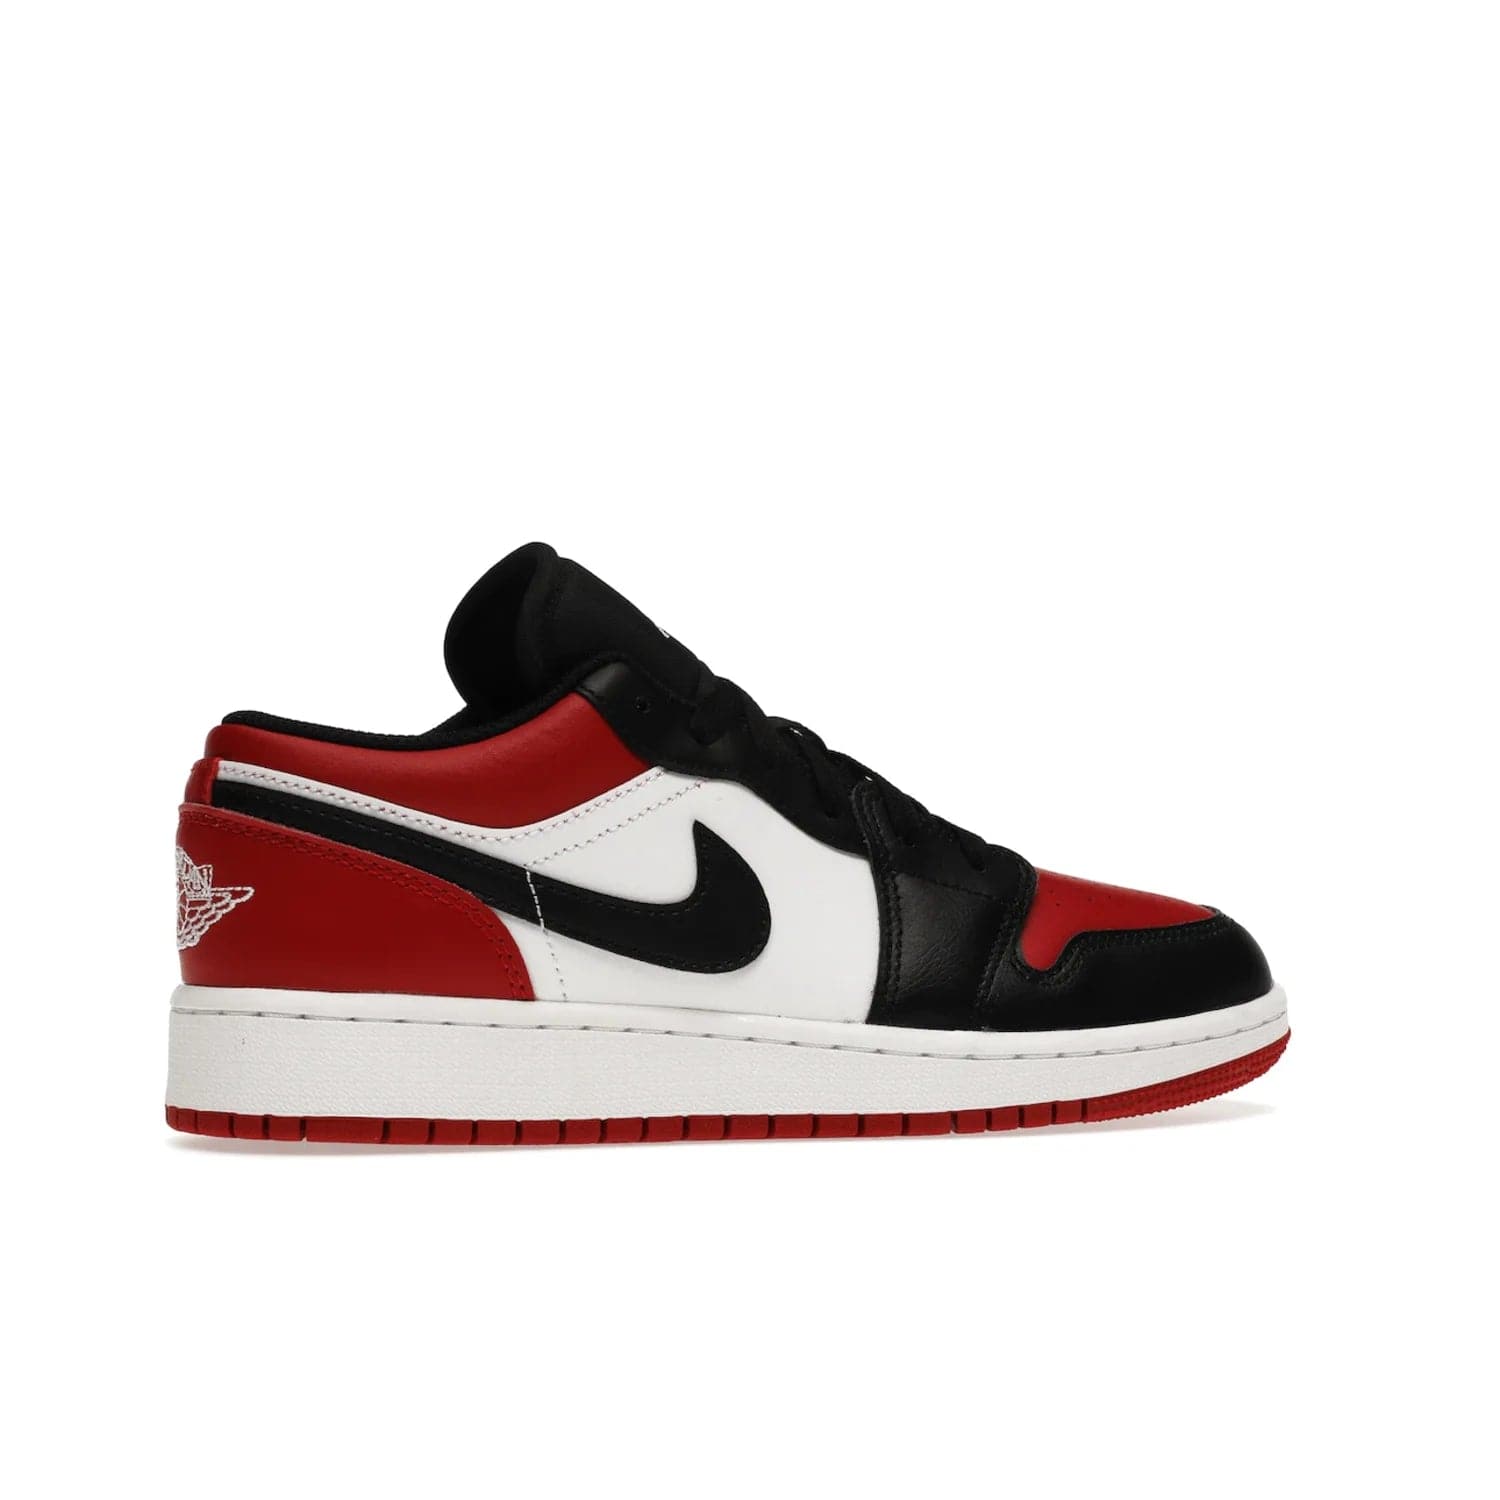 Jordan 1 Low Bred Toe (GS) - Image 35 - Only at www.BallersClubKickz.com - #
Iconic sneaker from Jordan brand with classic colorway, unique detailing & Air Jordan Wings logo. Step into the shoes of the greats with the Jordan 1 Low Bred Toe GS!